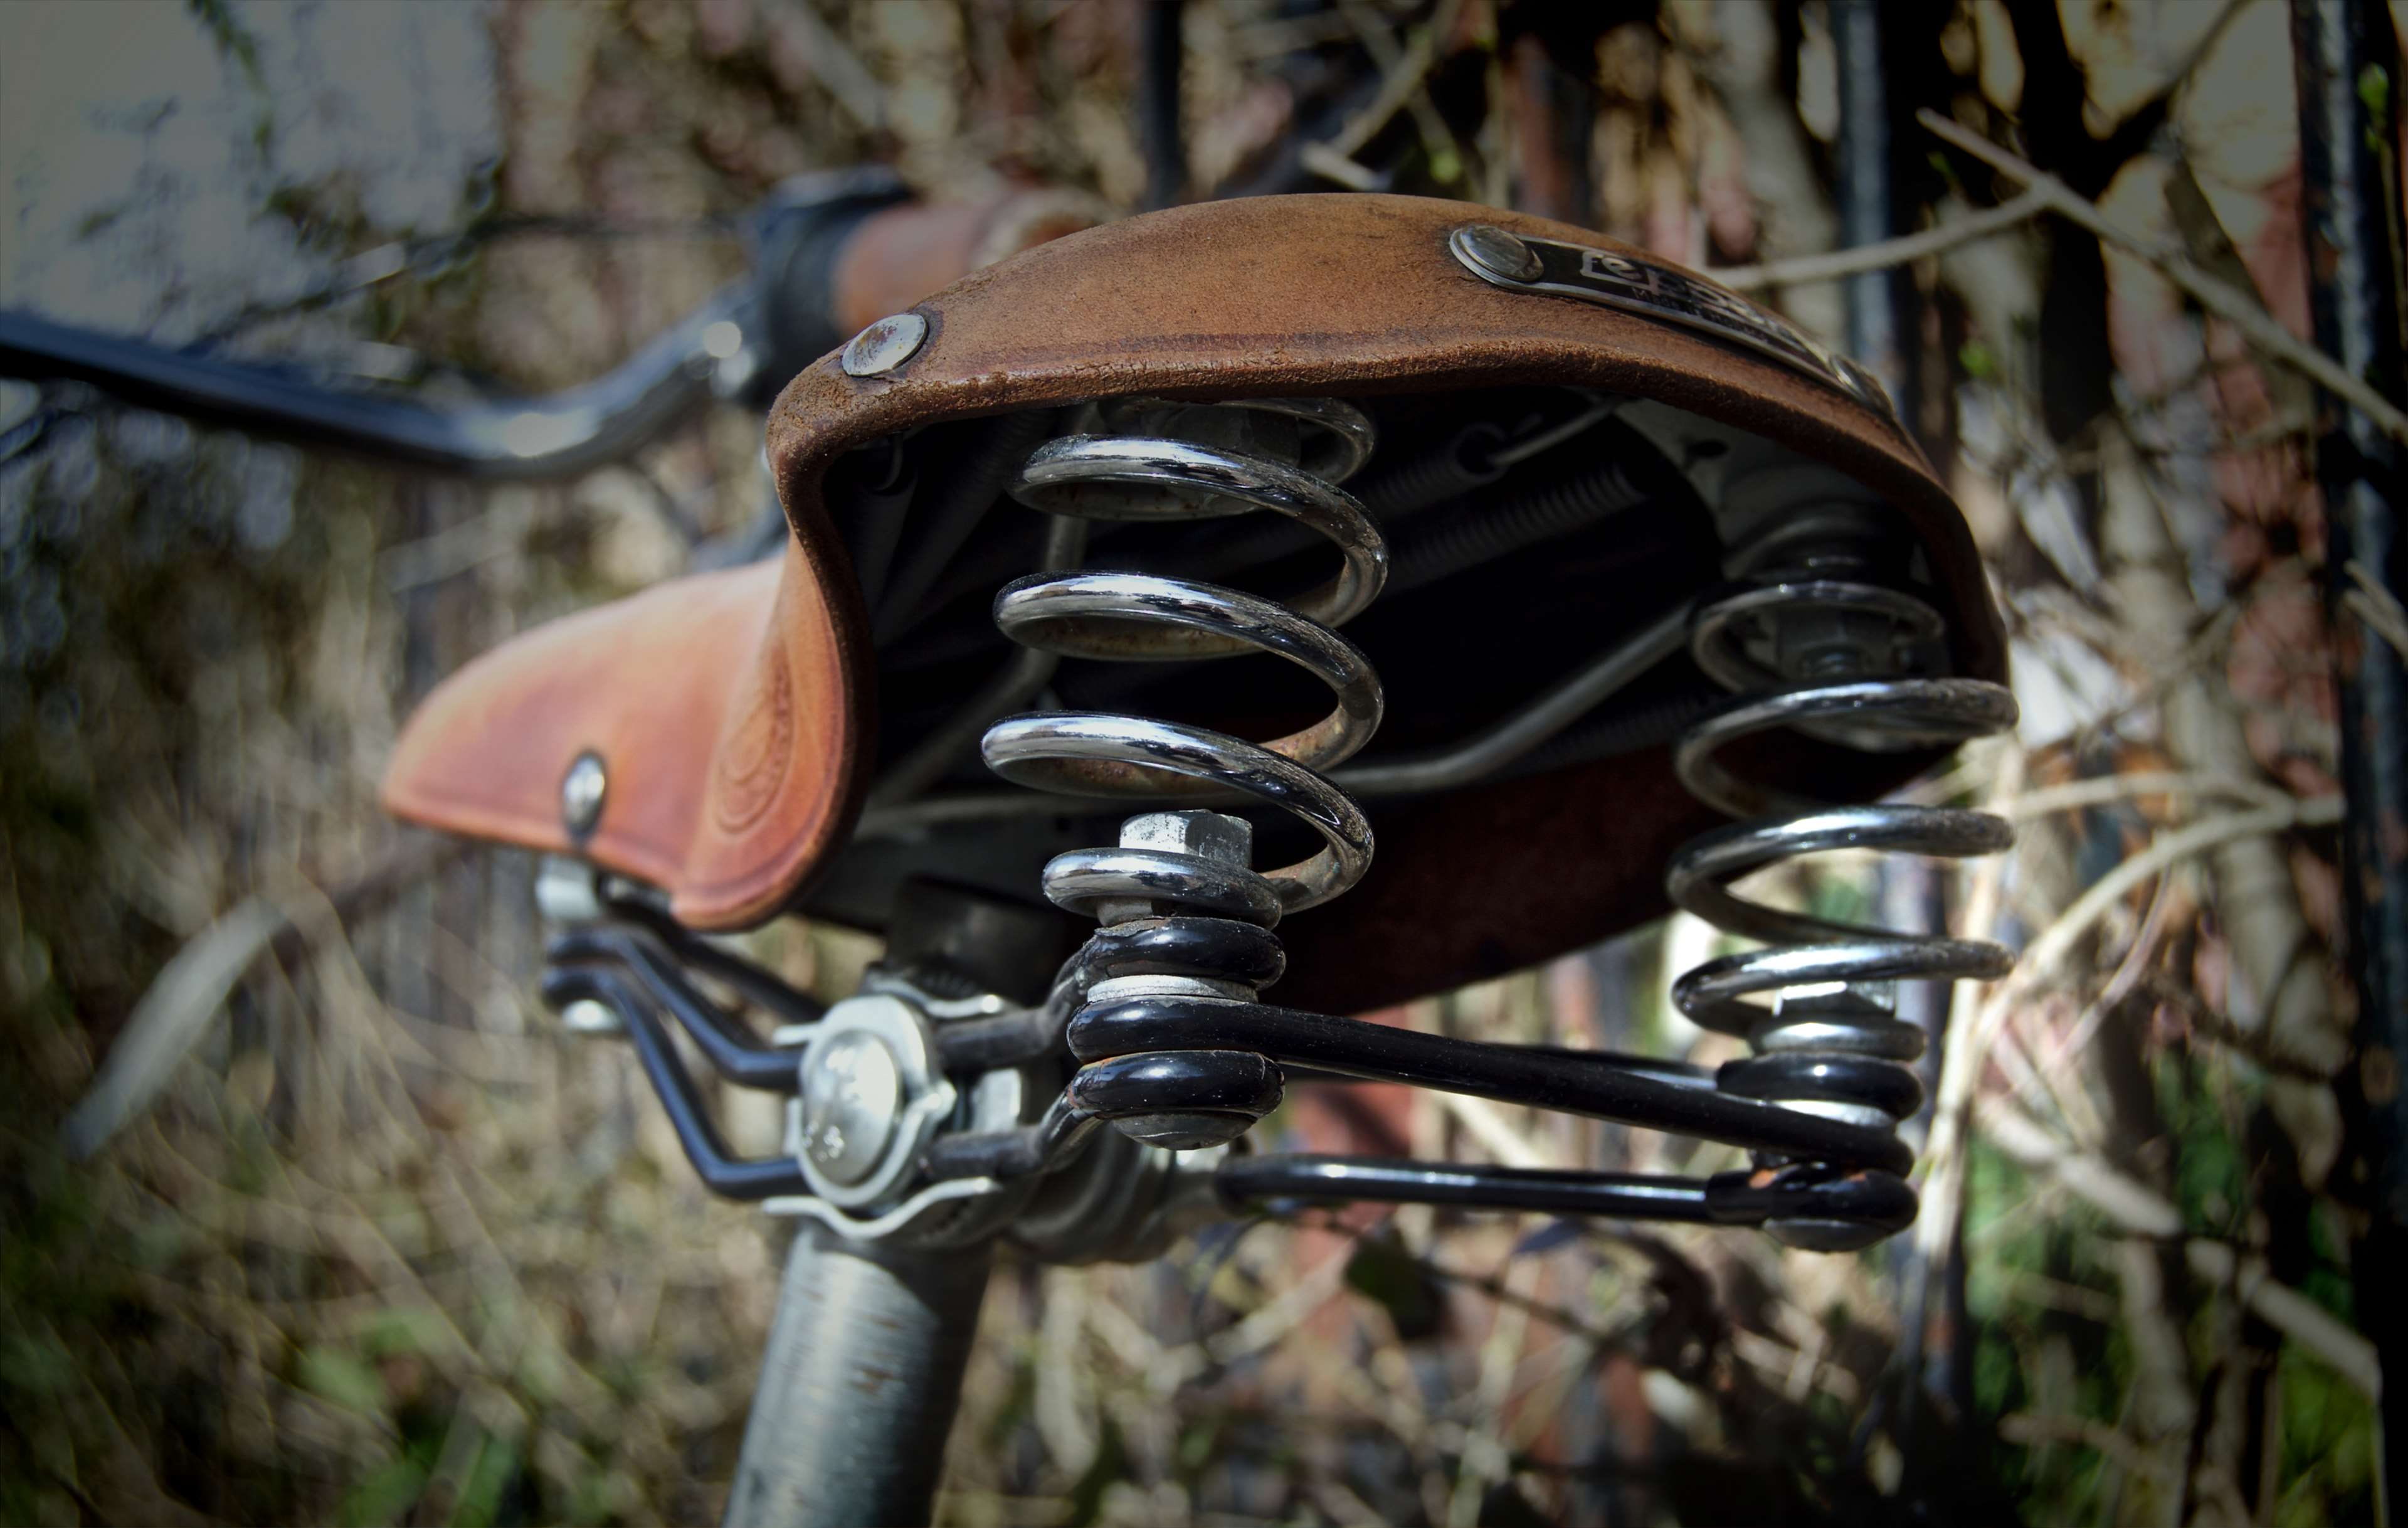 bicycle, bicycle saddle, bike, blur, close up, coil, leather seat